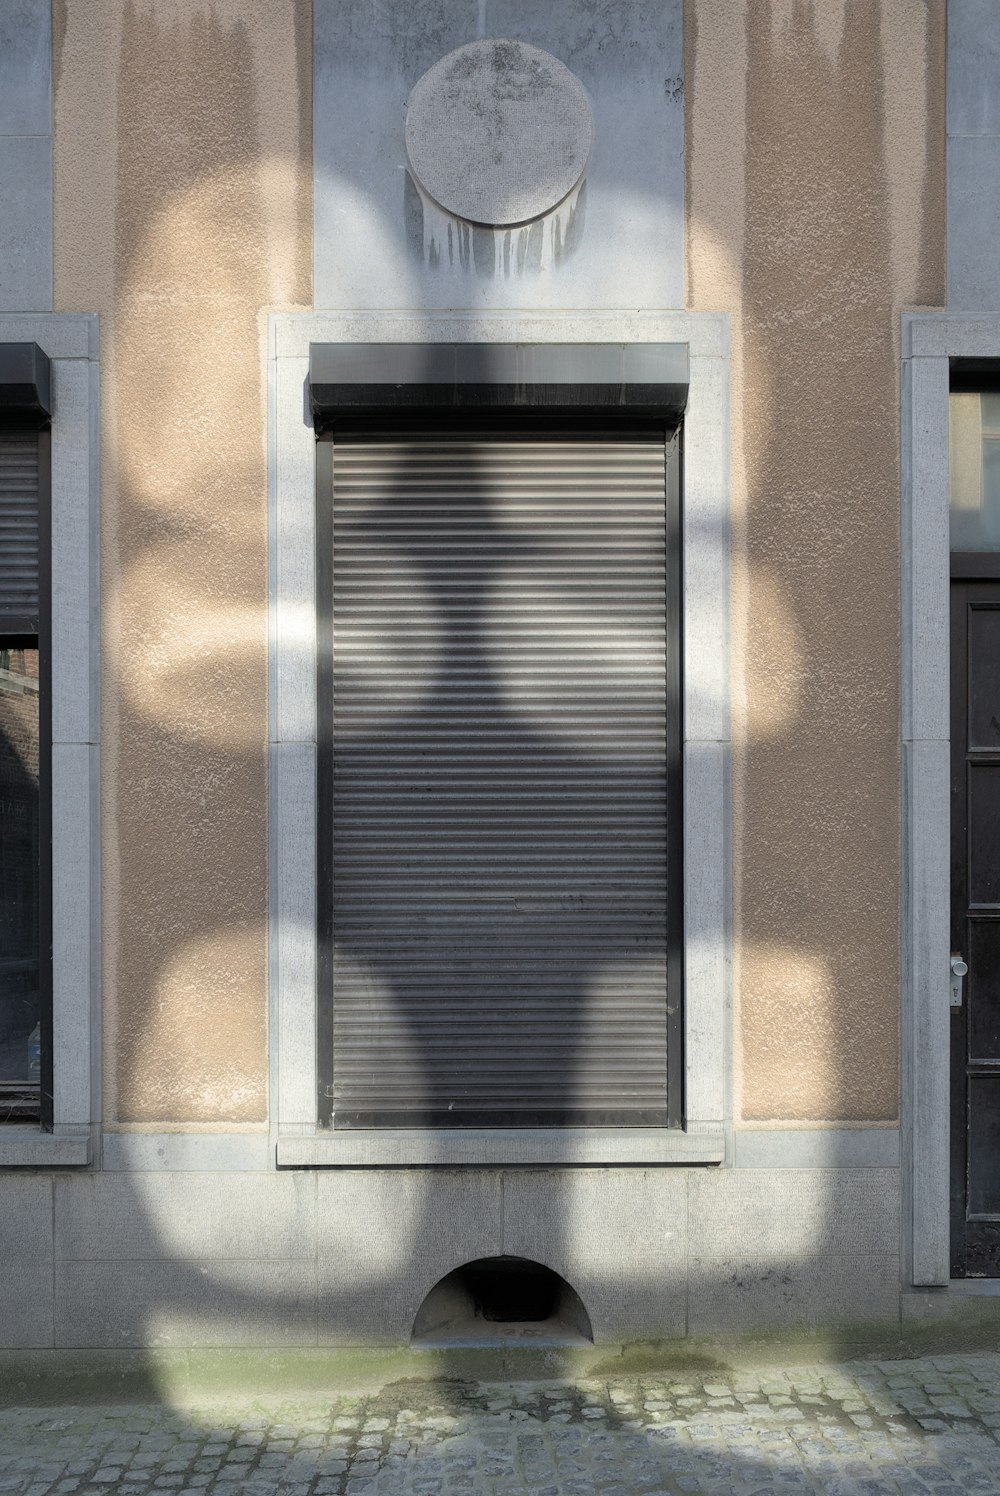 a shadow of a person on the side of a building